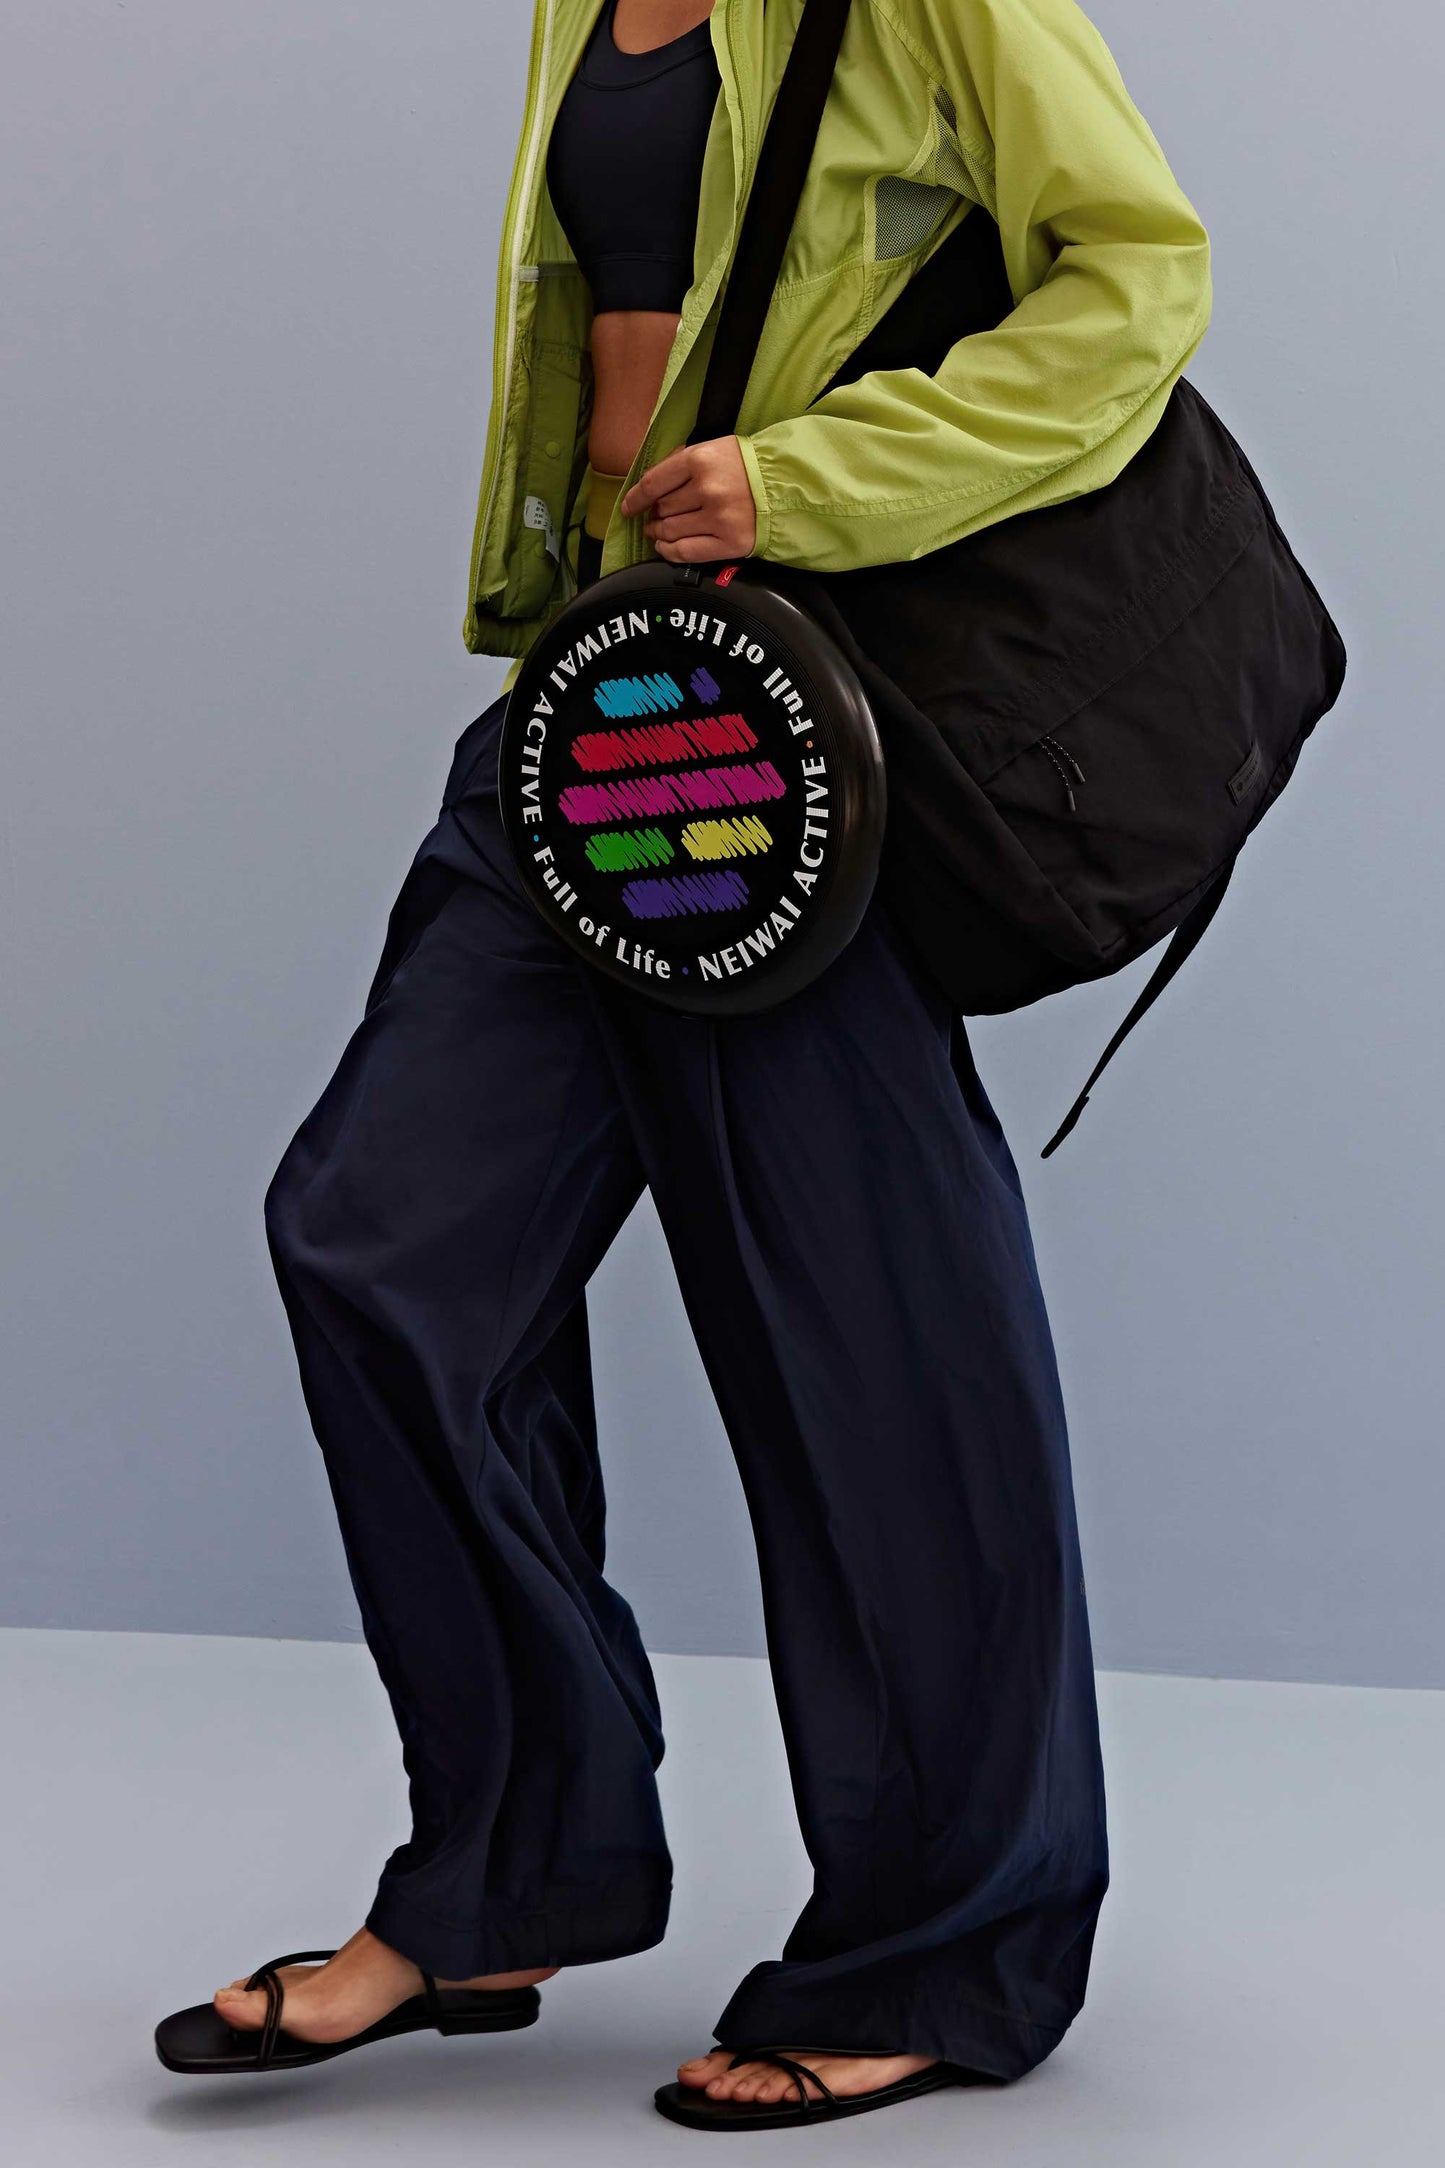 a woman wearing a green jacket and black sports bra, pair with navy pants and black bag